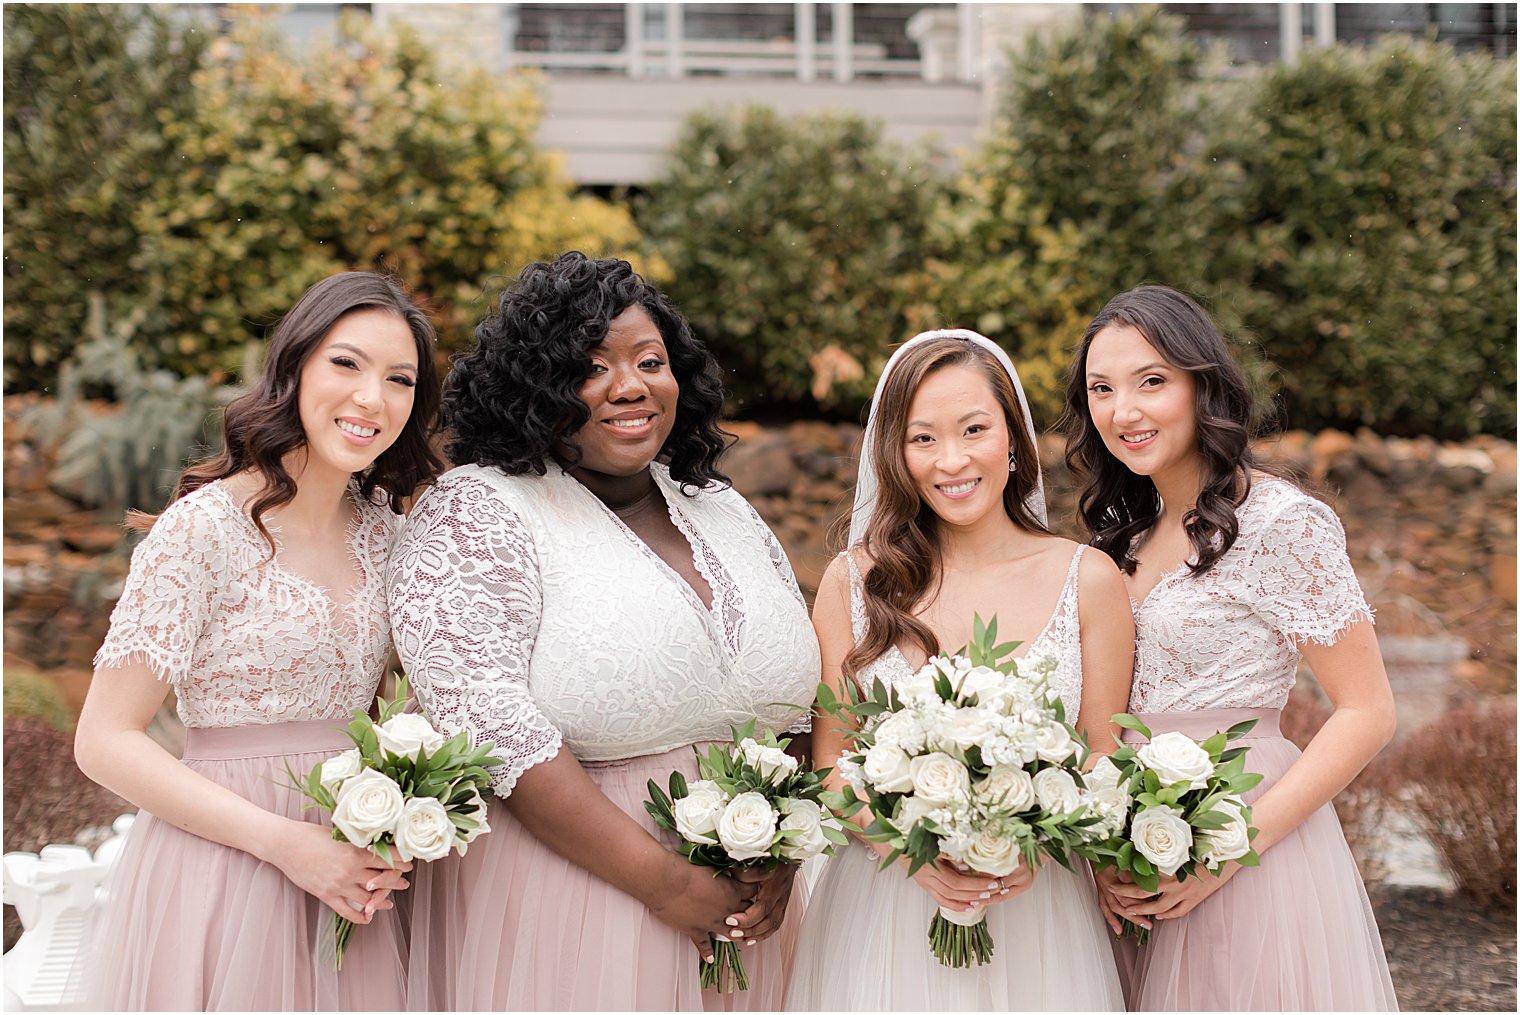 bride and bridesmaids pose together in pink gowns